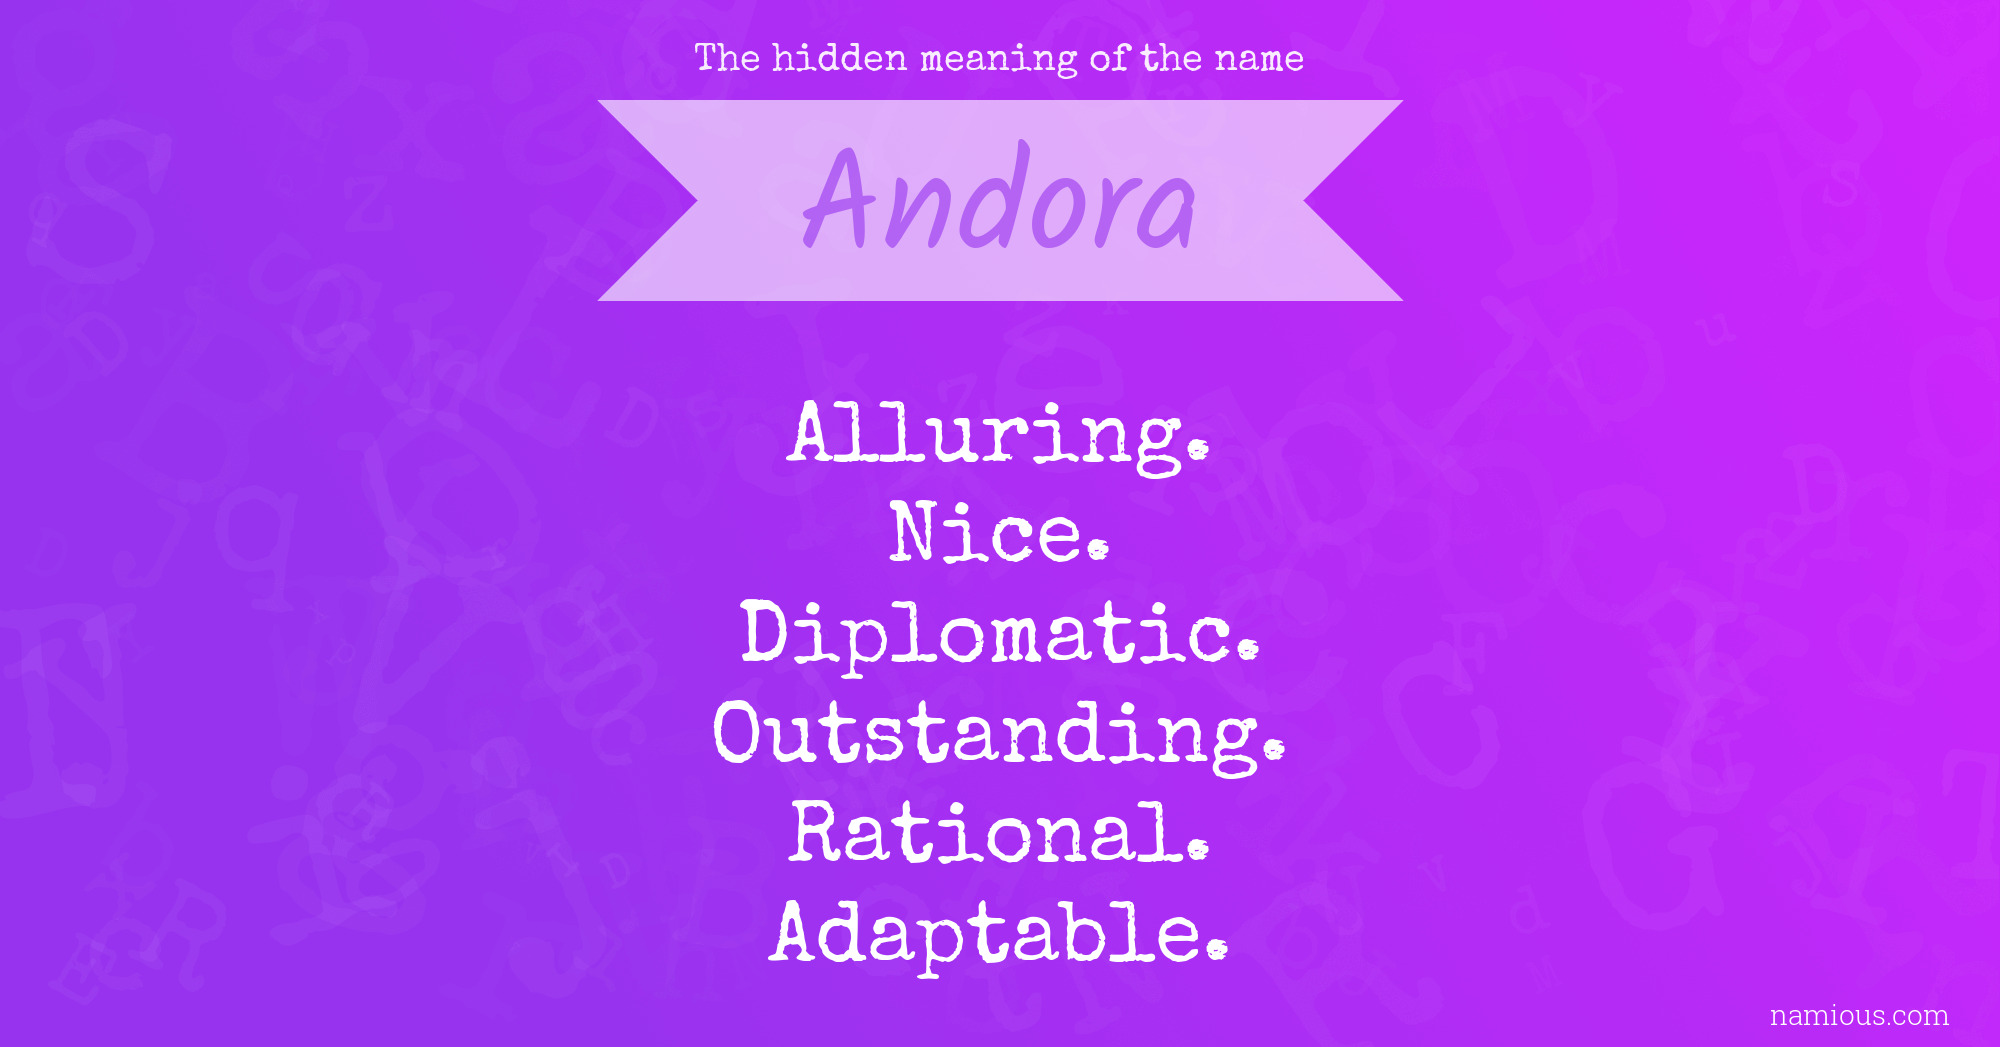 The hidden meaning of the name Andora